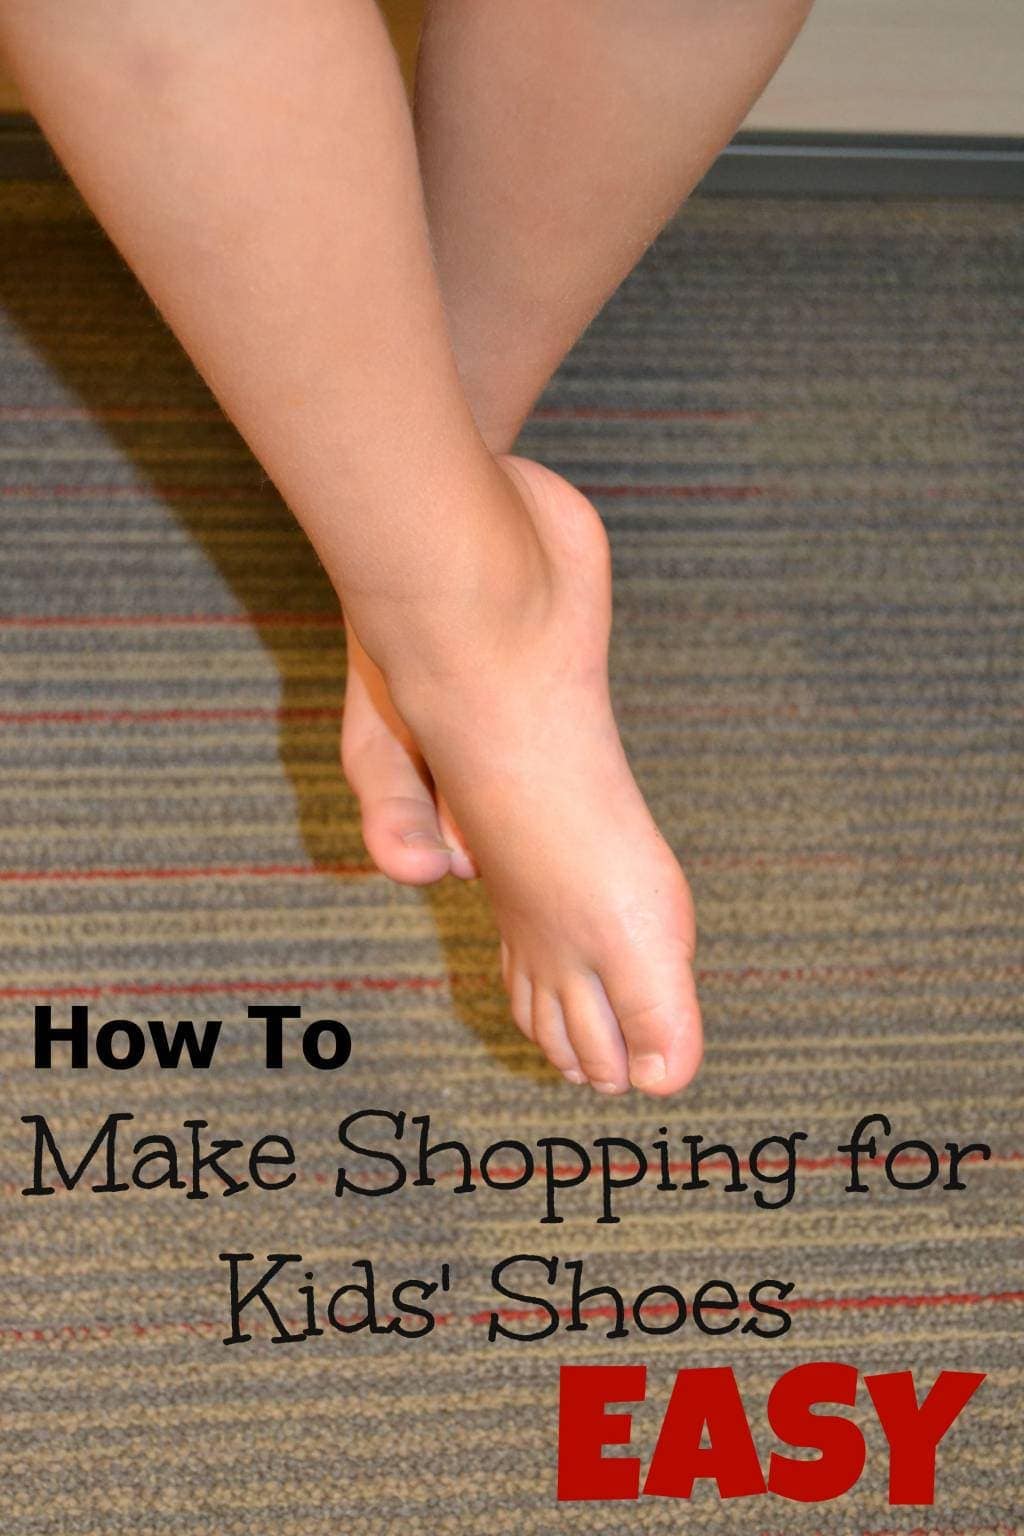 Or so she saysâ€¦:How to Make Shopping for Kids' Shoes EASY - Or so ...